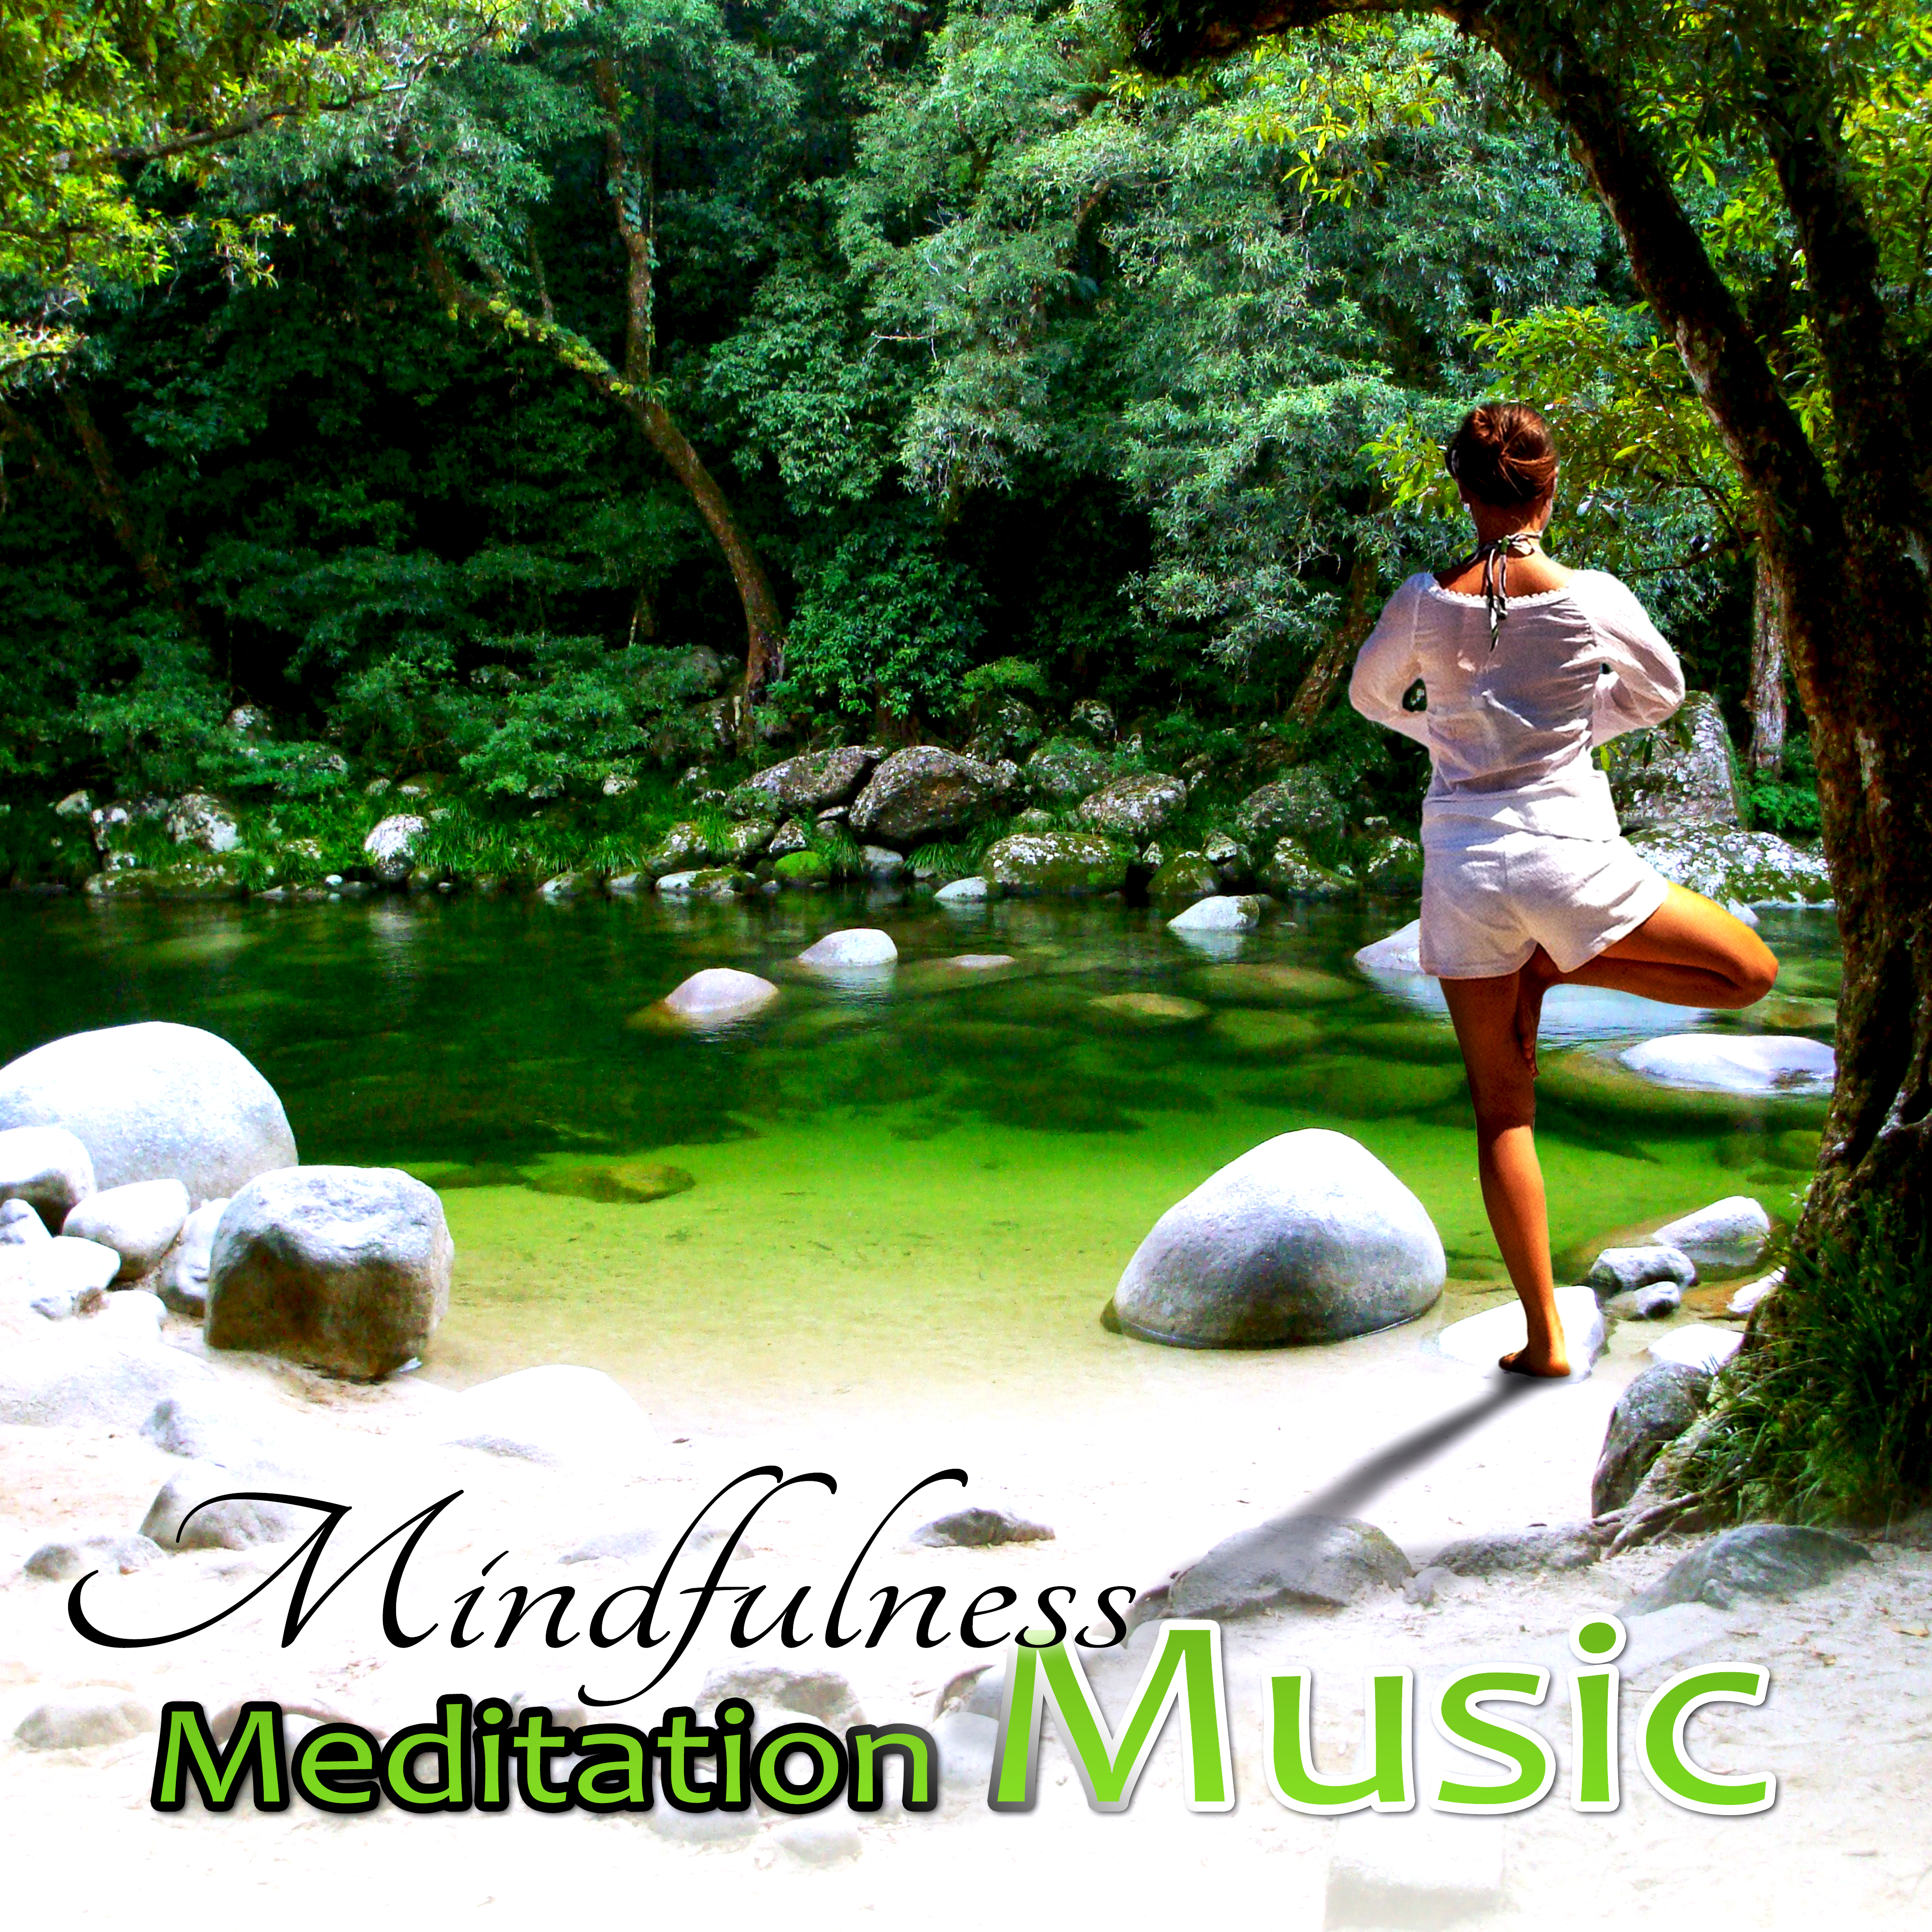 Mindfulness Meditation Music Exercises – Relaxing Music with Soothing Nature Sounds for Yoga Classes, White Noise for Relaxation